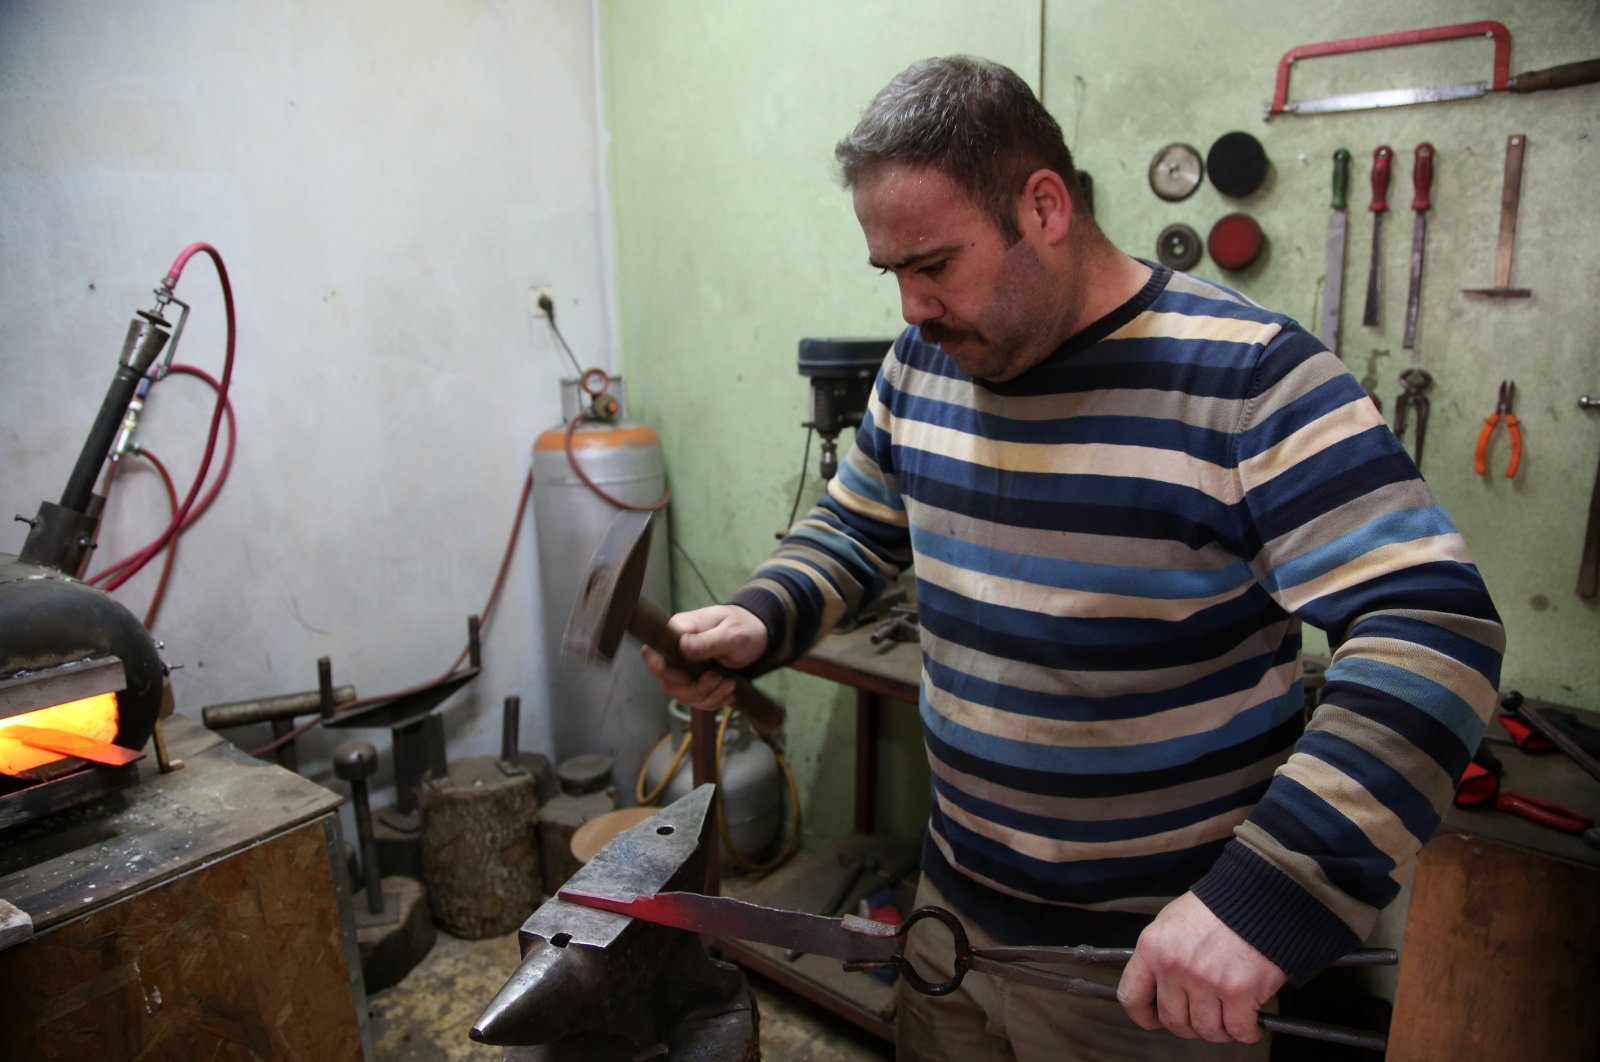 Fatih Altanay forges the iron he heats in a high-heat propane stove in his workshop. (AA Photo)